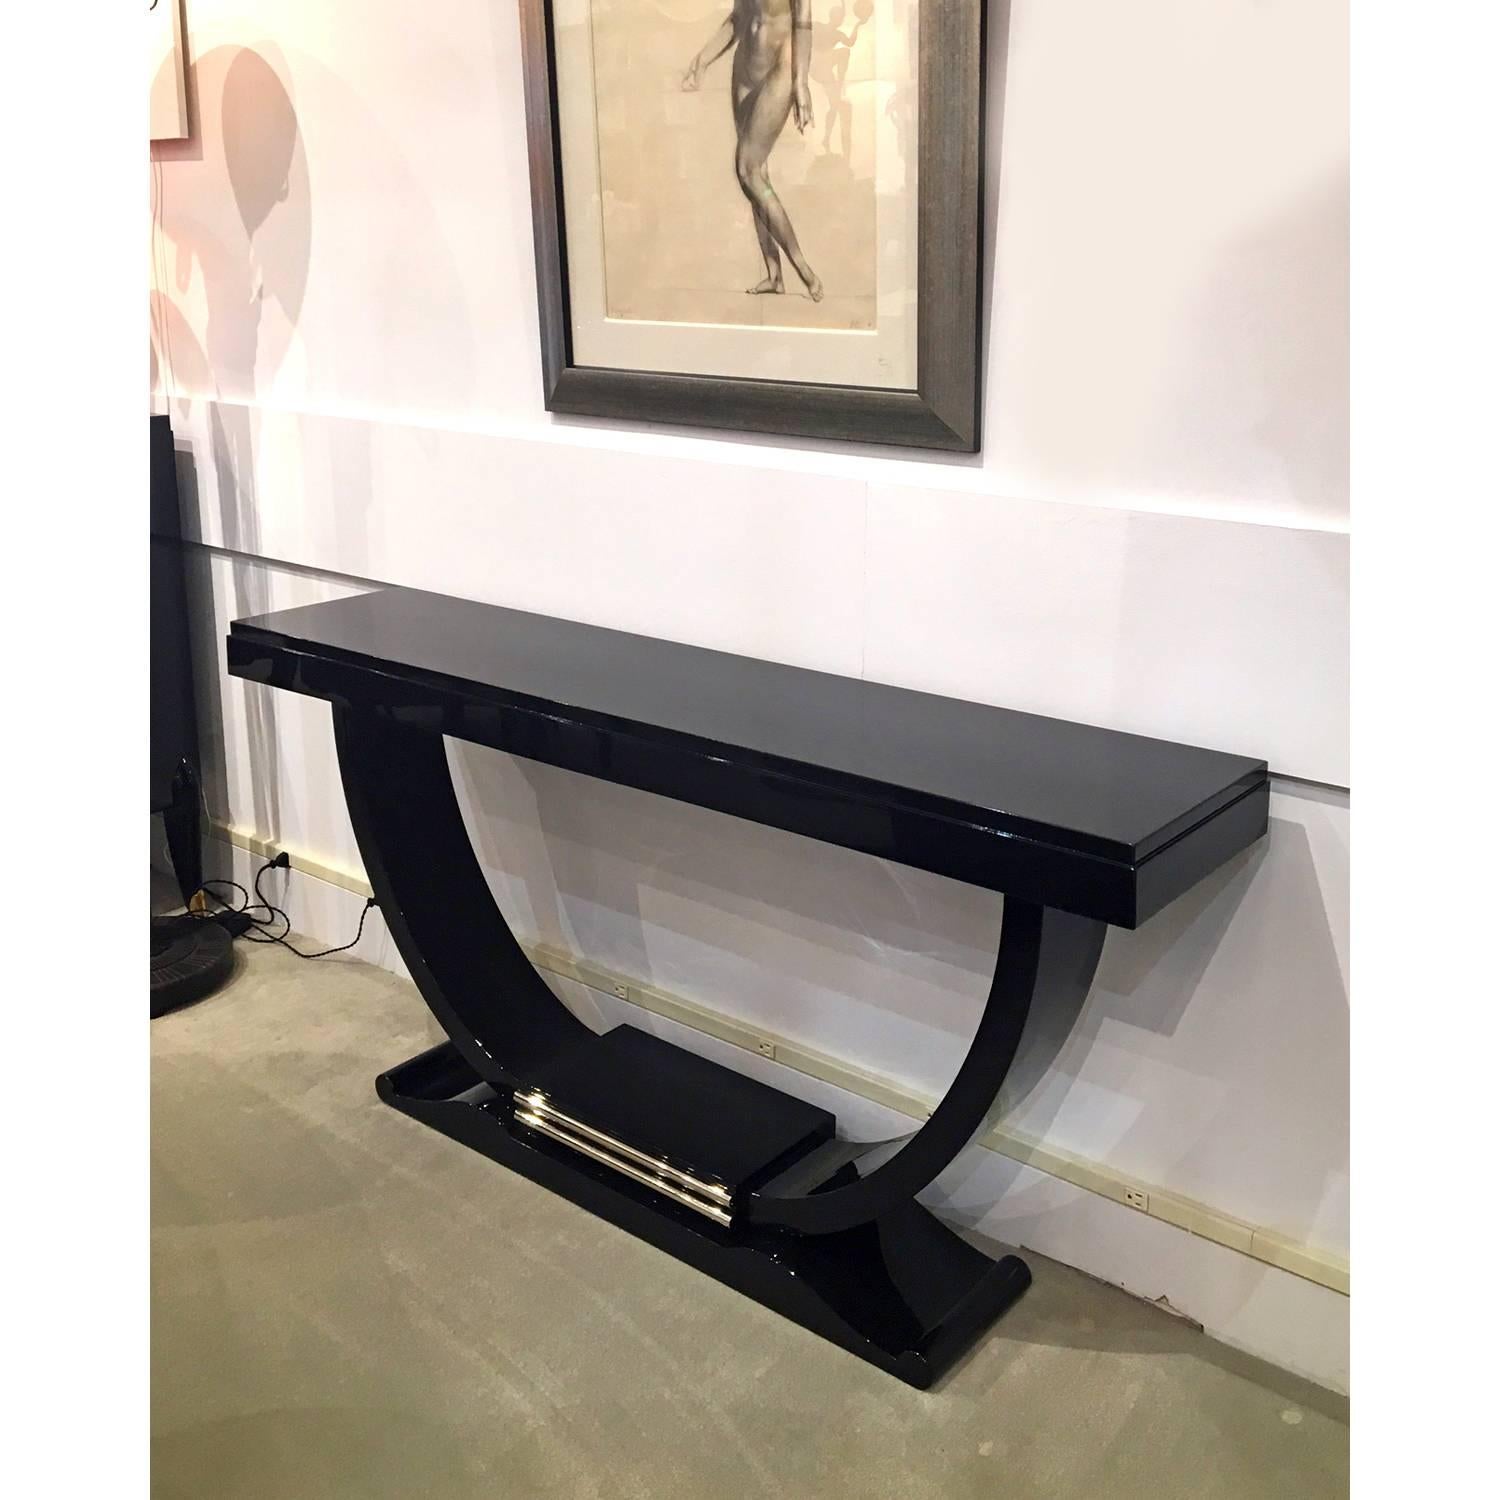 A free-standing black lacquered console table with a U-shape design and details in nickel-plated metal.
Made in France
circa 1930.